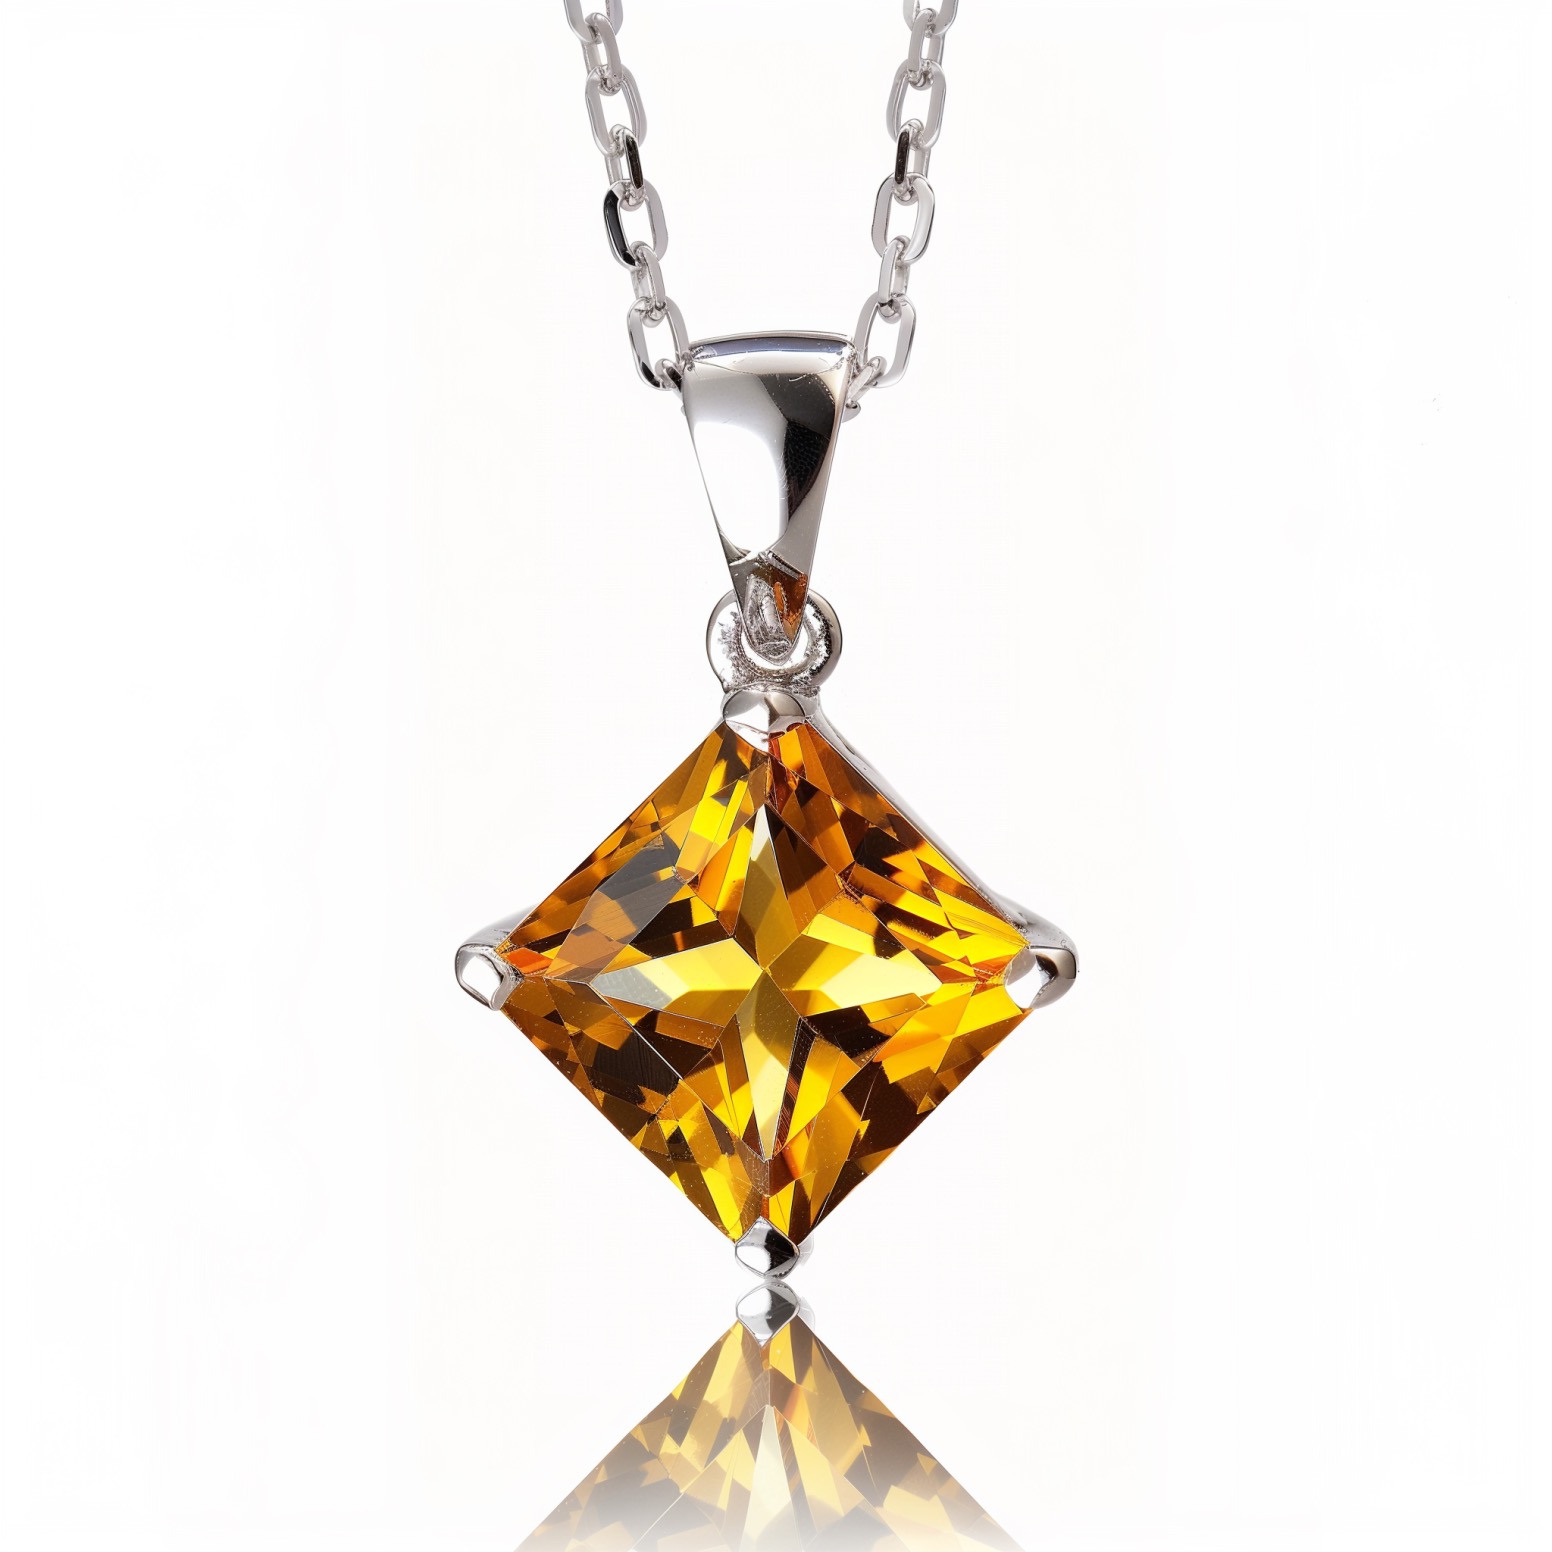 Citrine Jewelry that highlights citrine's connection with the sun: a diamond radiant citrine pendant necklace.